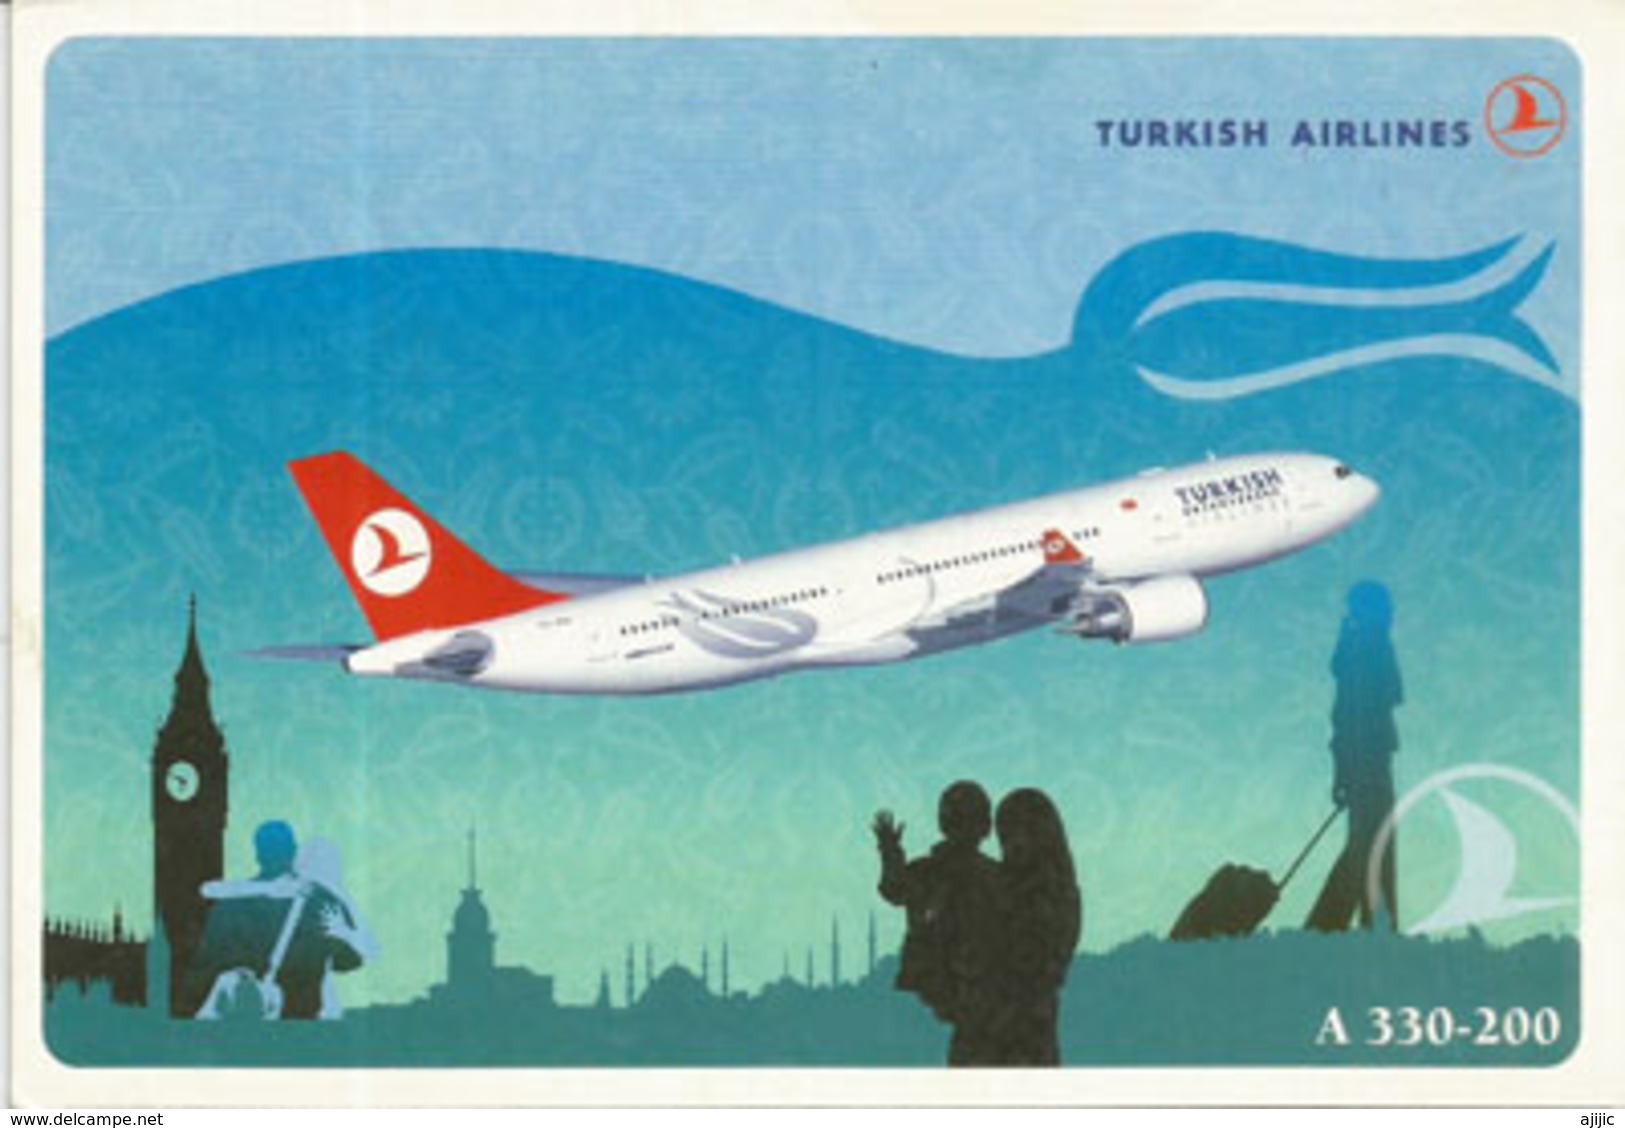 Airbus A 330-200 Of The Turkish Airlines,   Unadressed Postcard - 1946-....: Era Moderna